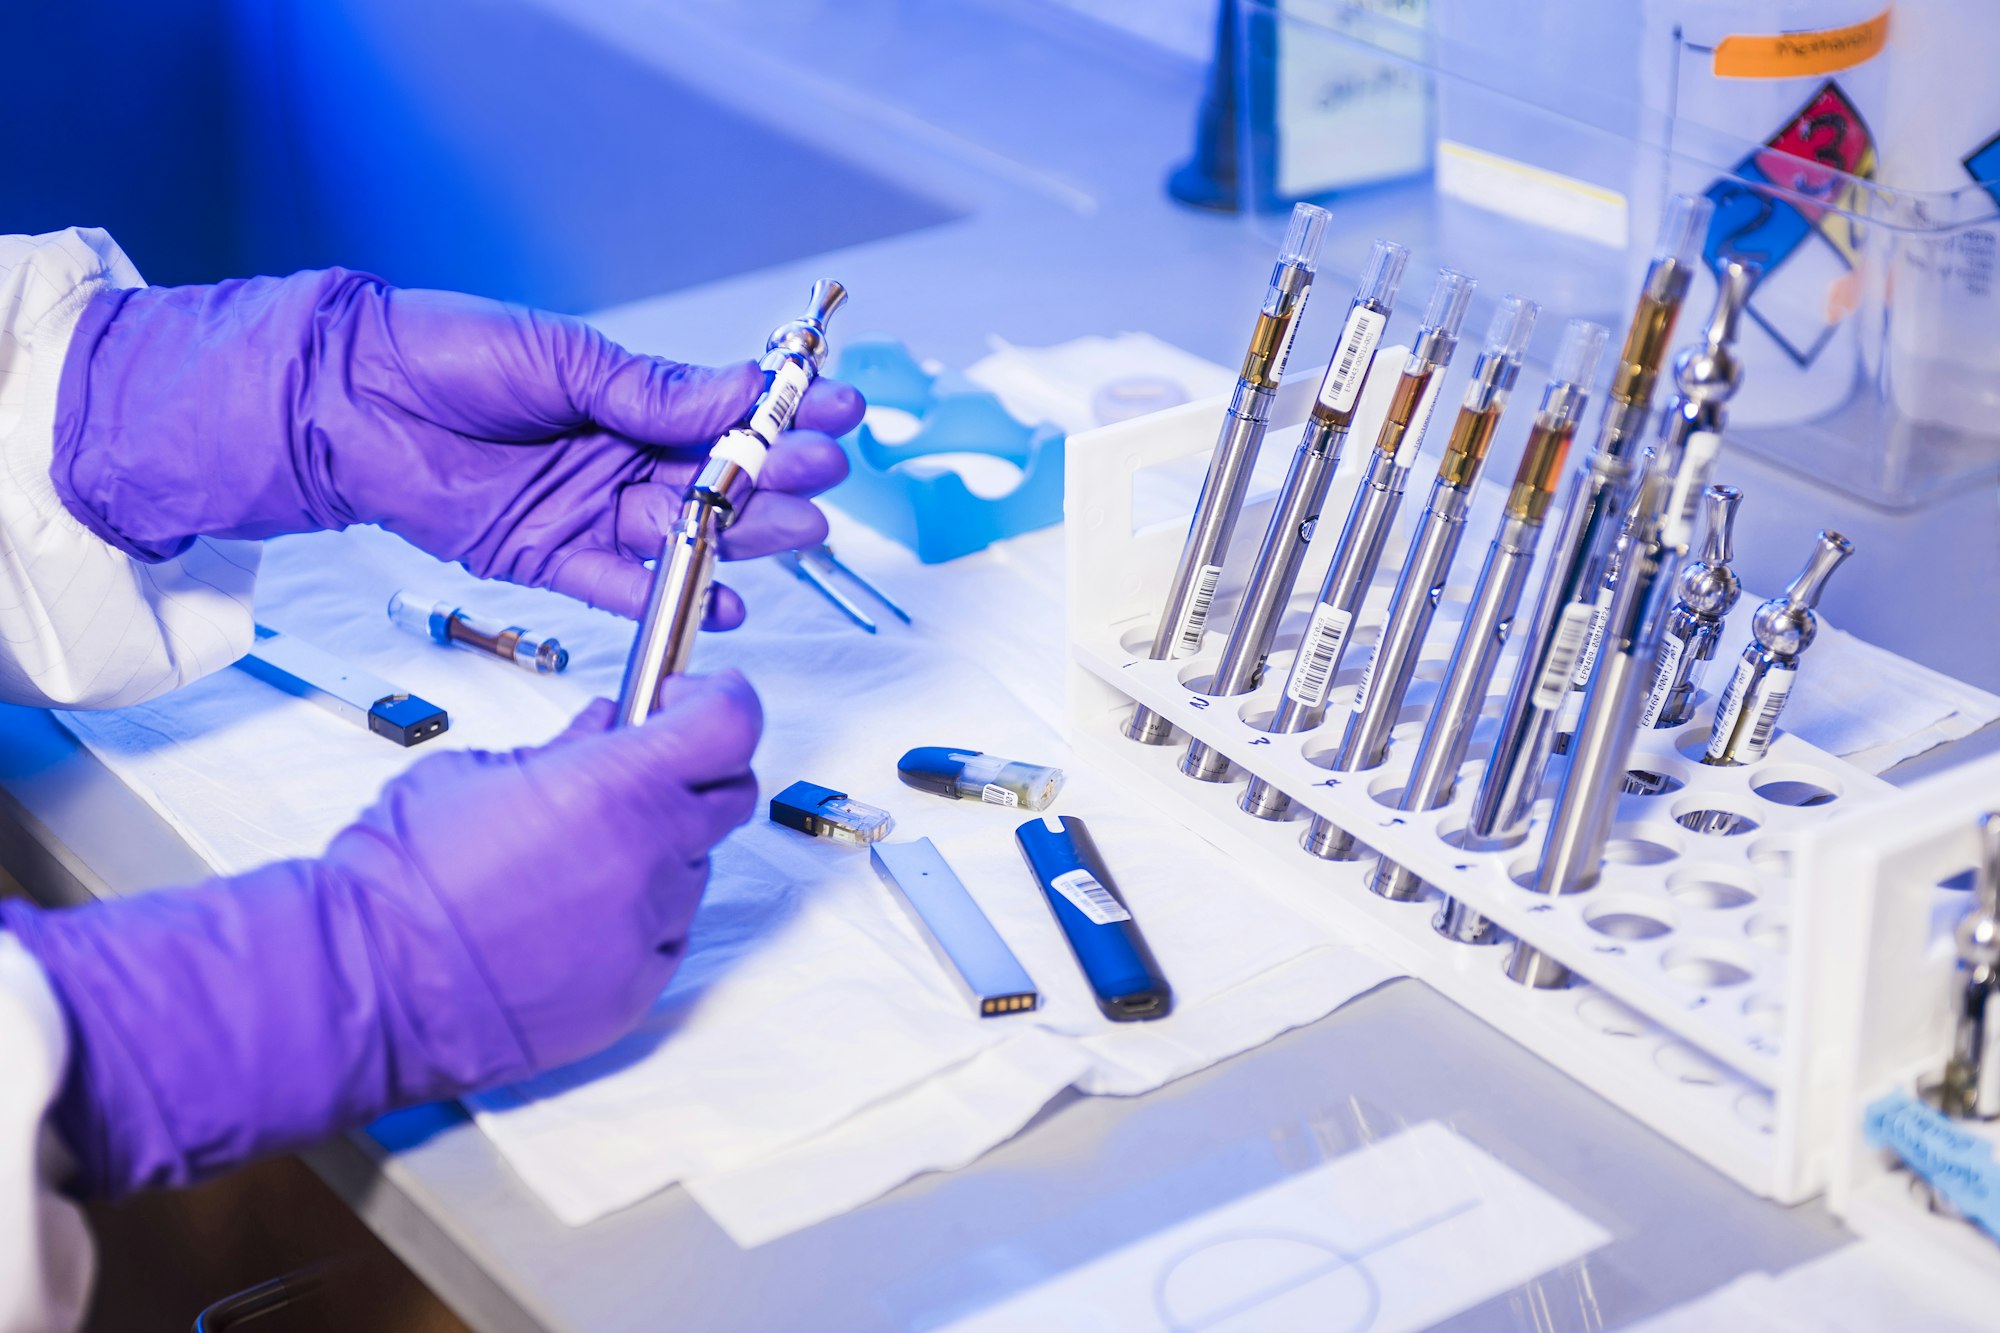 Here you see the gloved hands of a Centers for Disease Control and Prevention (CDC) laboratory technician working with electronic cigarettes, referred to as e-cigarettes, or e-cigs, and vaping pens, while inside a laboratory environment.